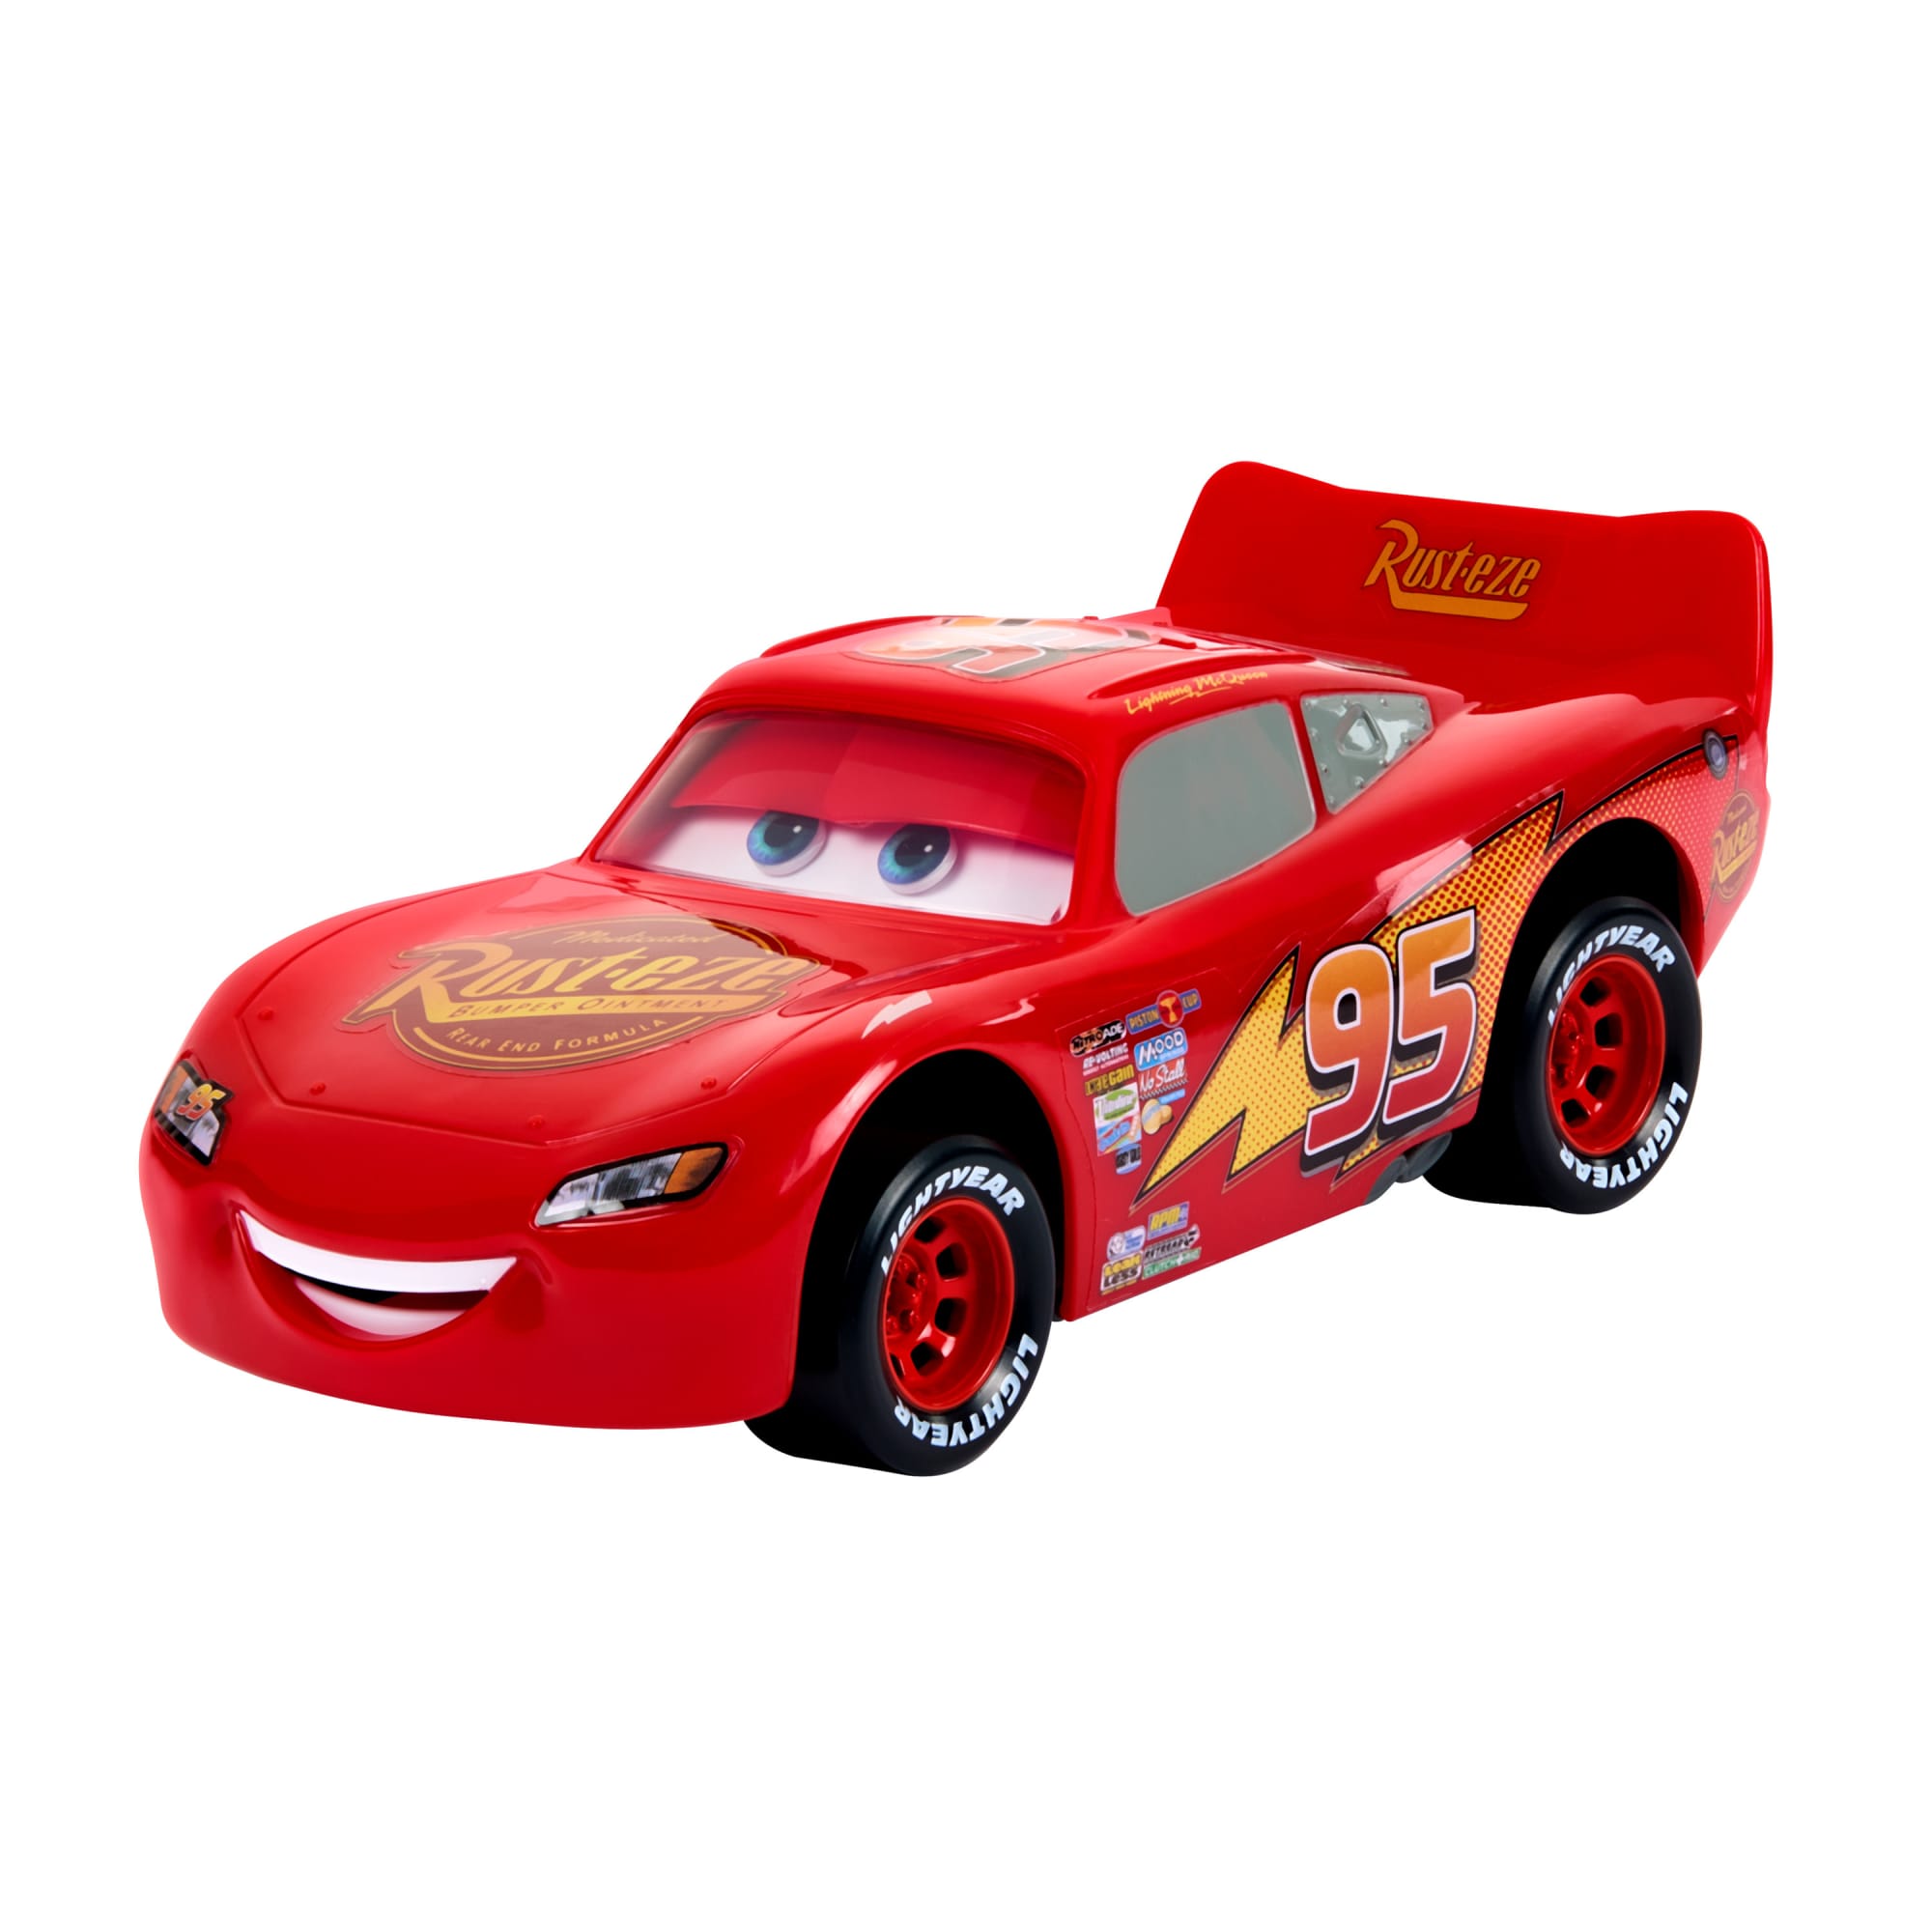 Disney and Pixar Cars Moving Moments Lightning McQueen